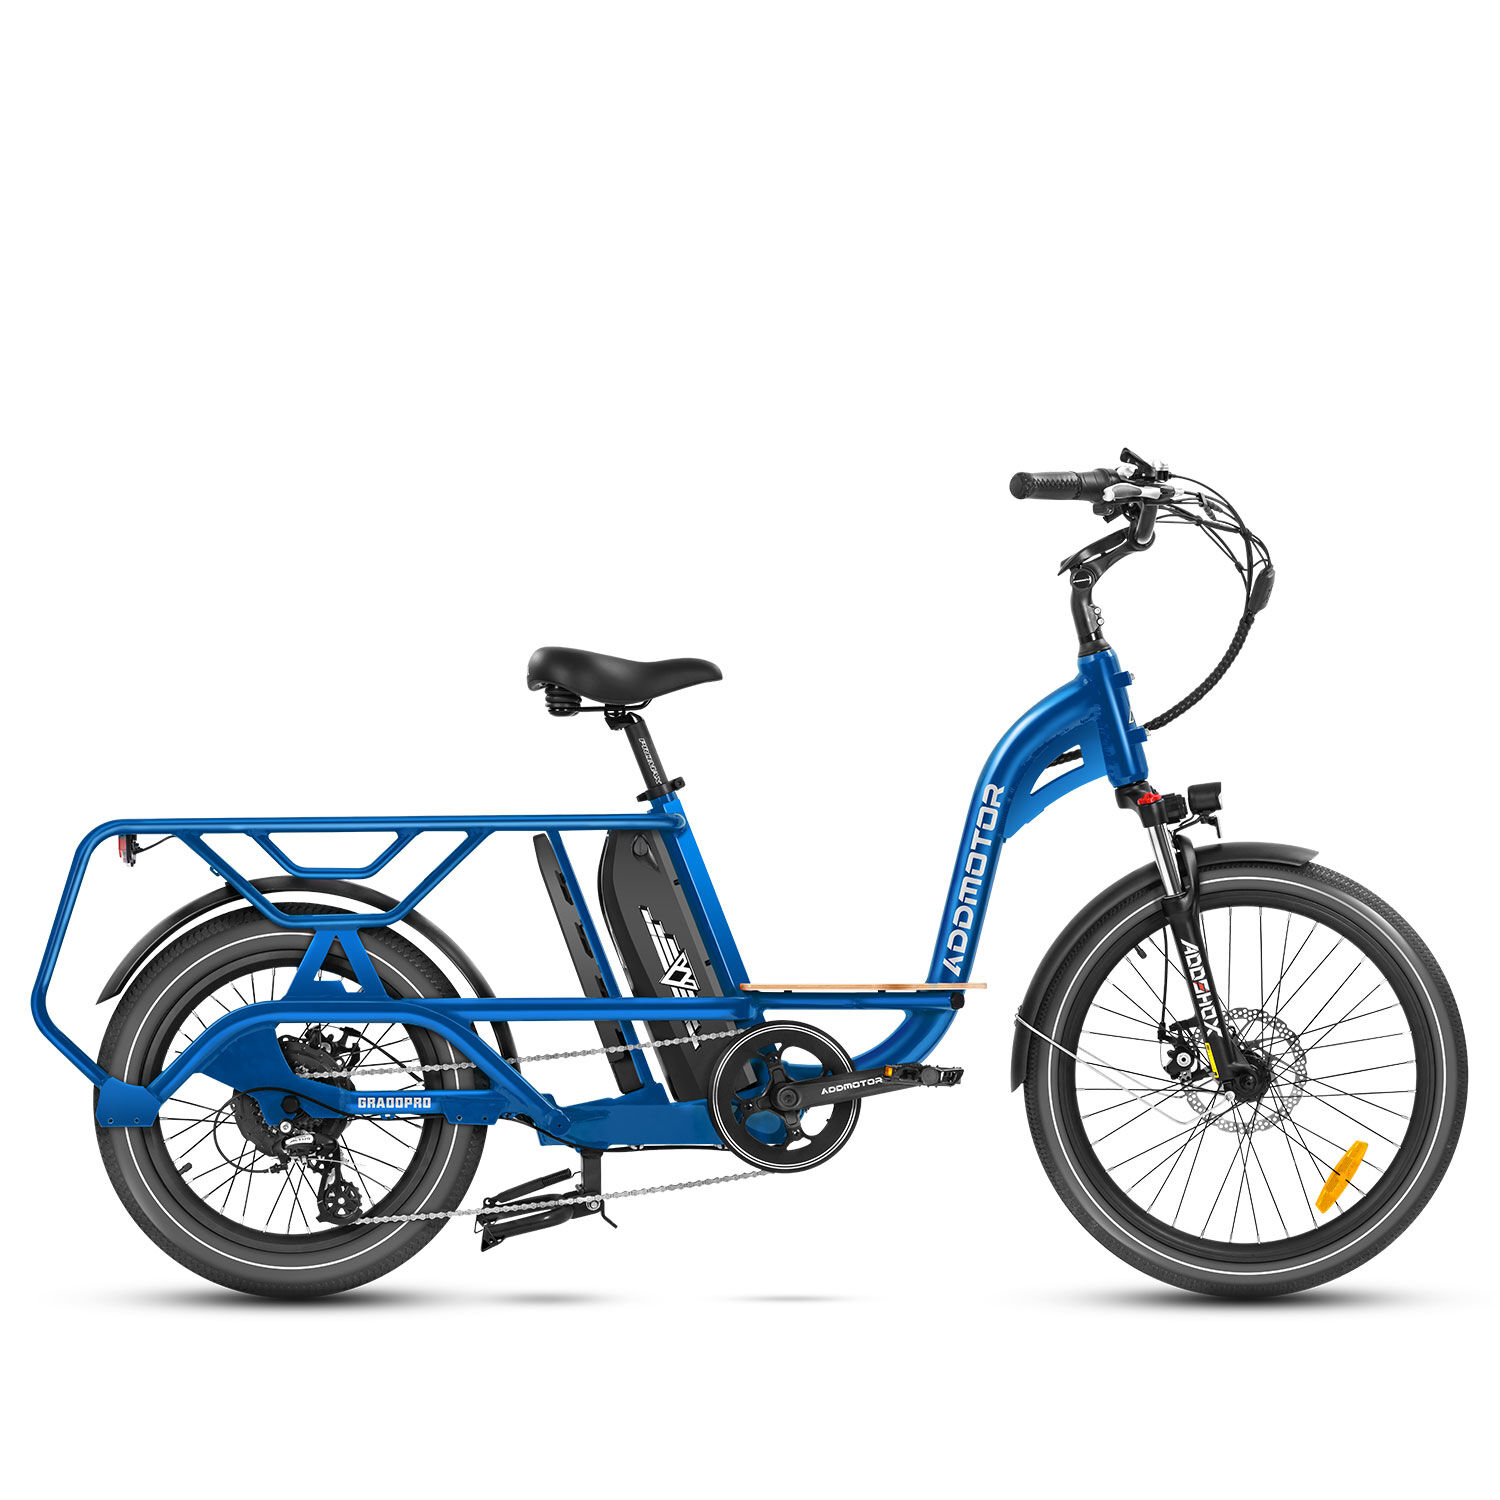 Addmotor Graoopro Ebike   Best Dual Battery Electric Bikes   Adults Cargo Electric Bicycle   Up To 210+ Miles   Neptune Blue + Single-Battery